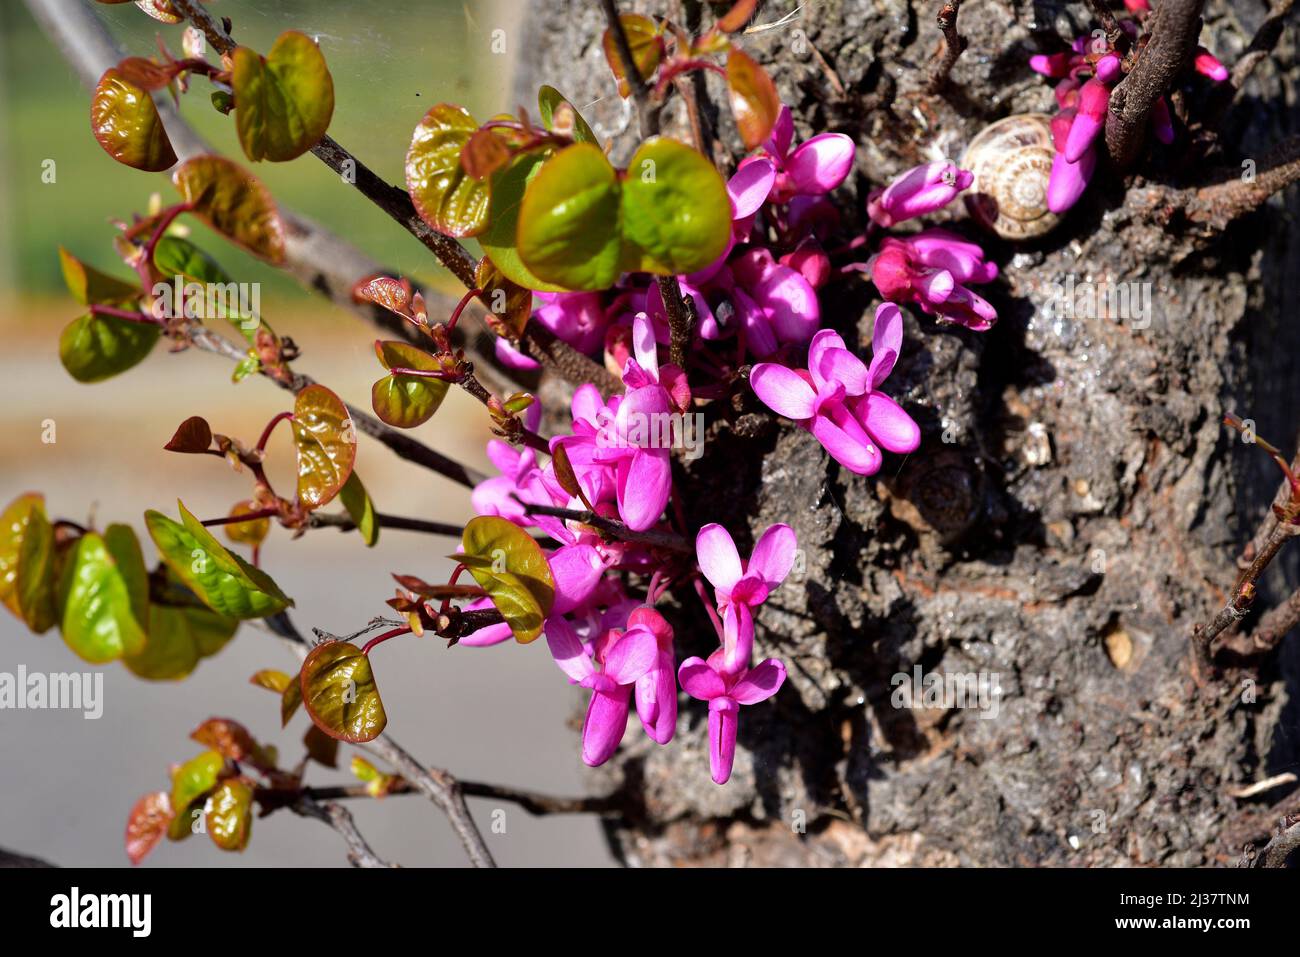 Judas tree (Cercis siliquastrum) is a deciduous tree native to central and eastern Mediterranean region. Flowers and young leaves detail. Stock Photo